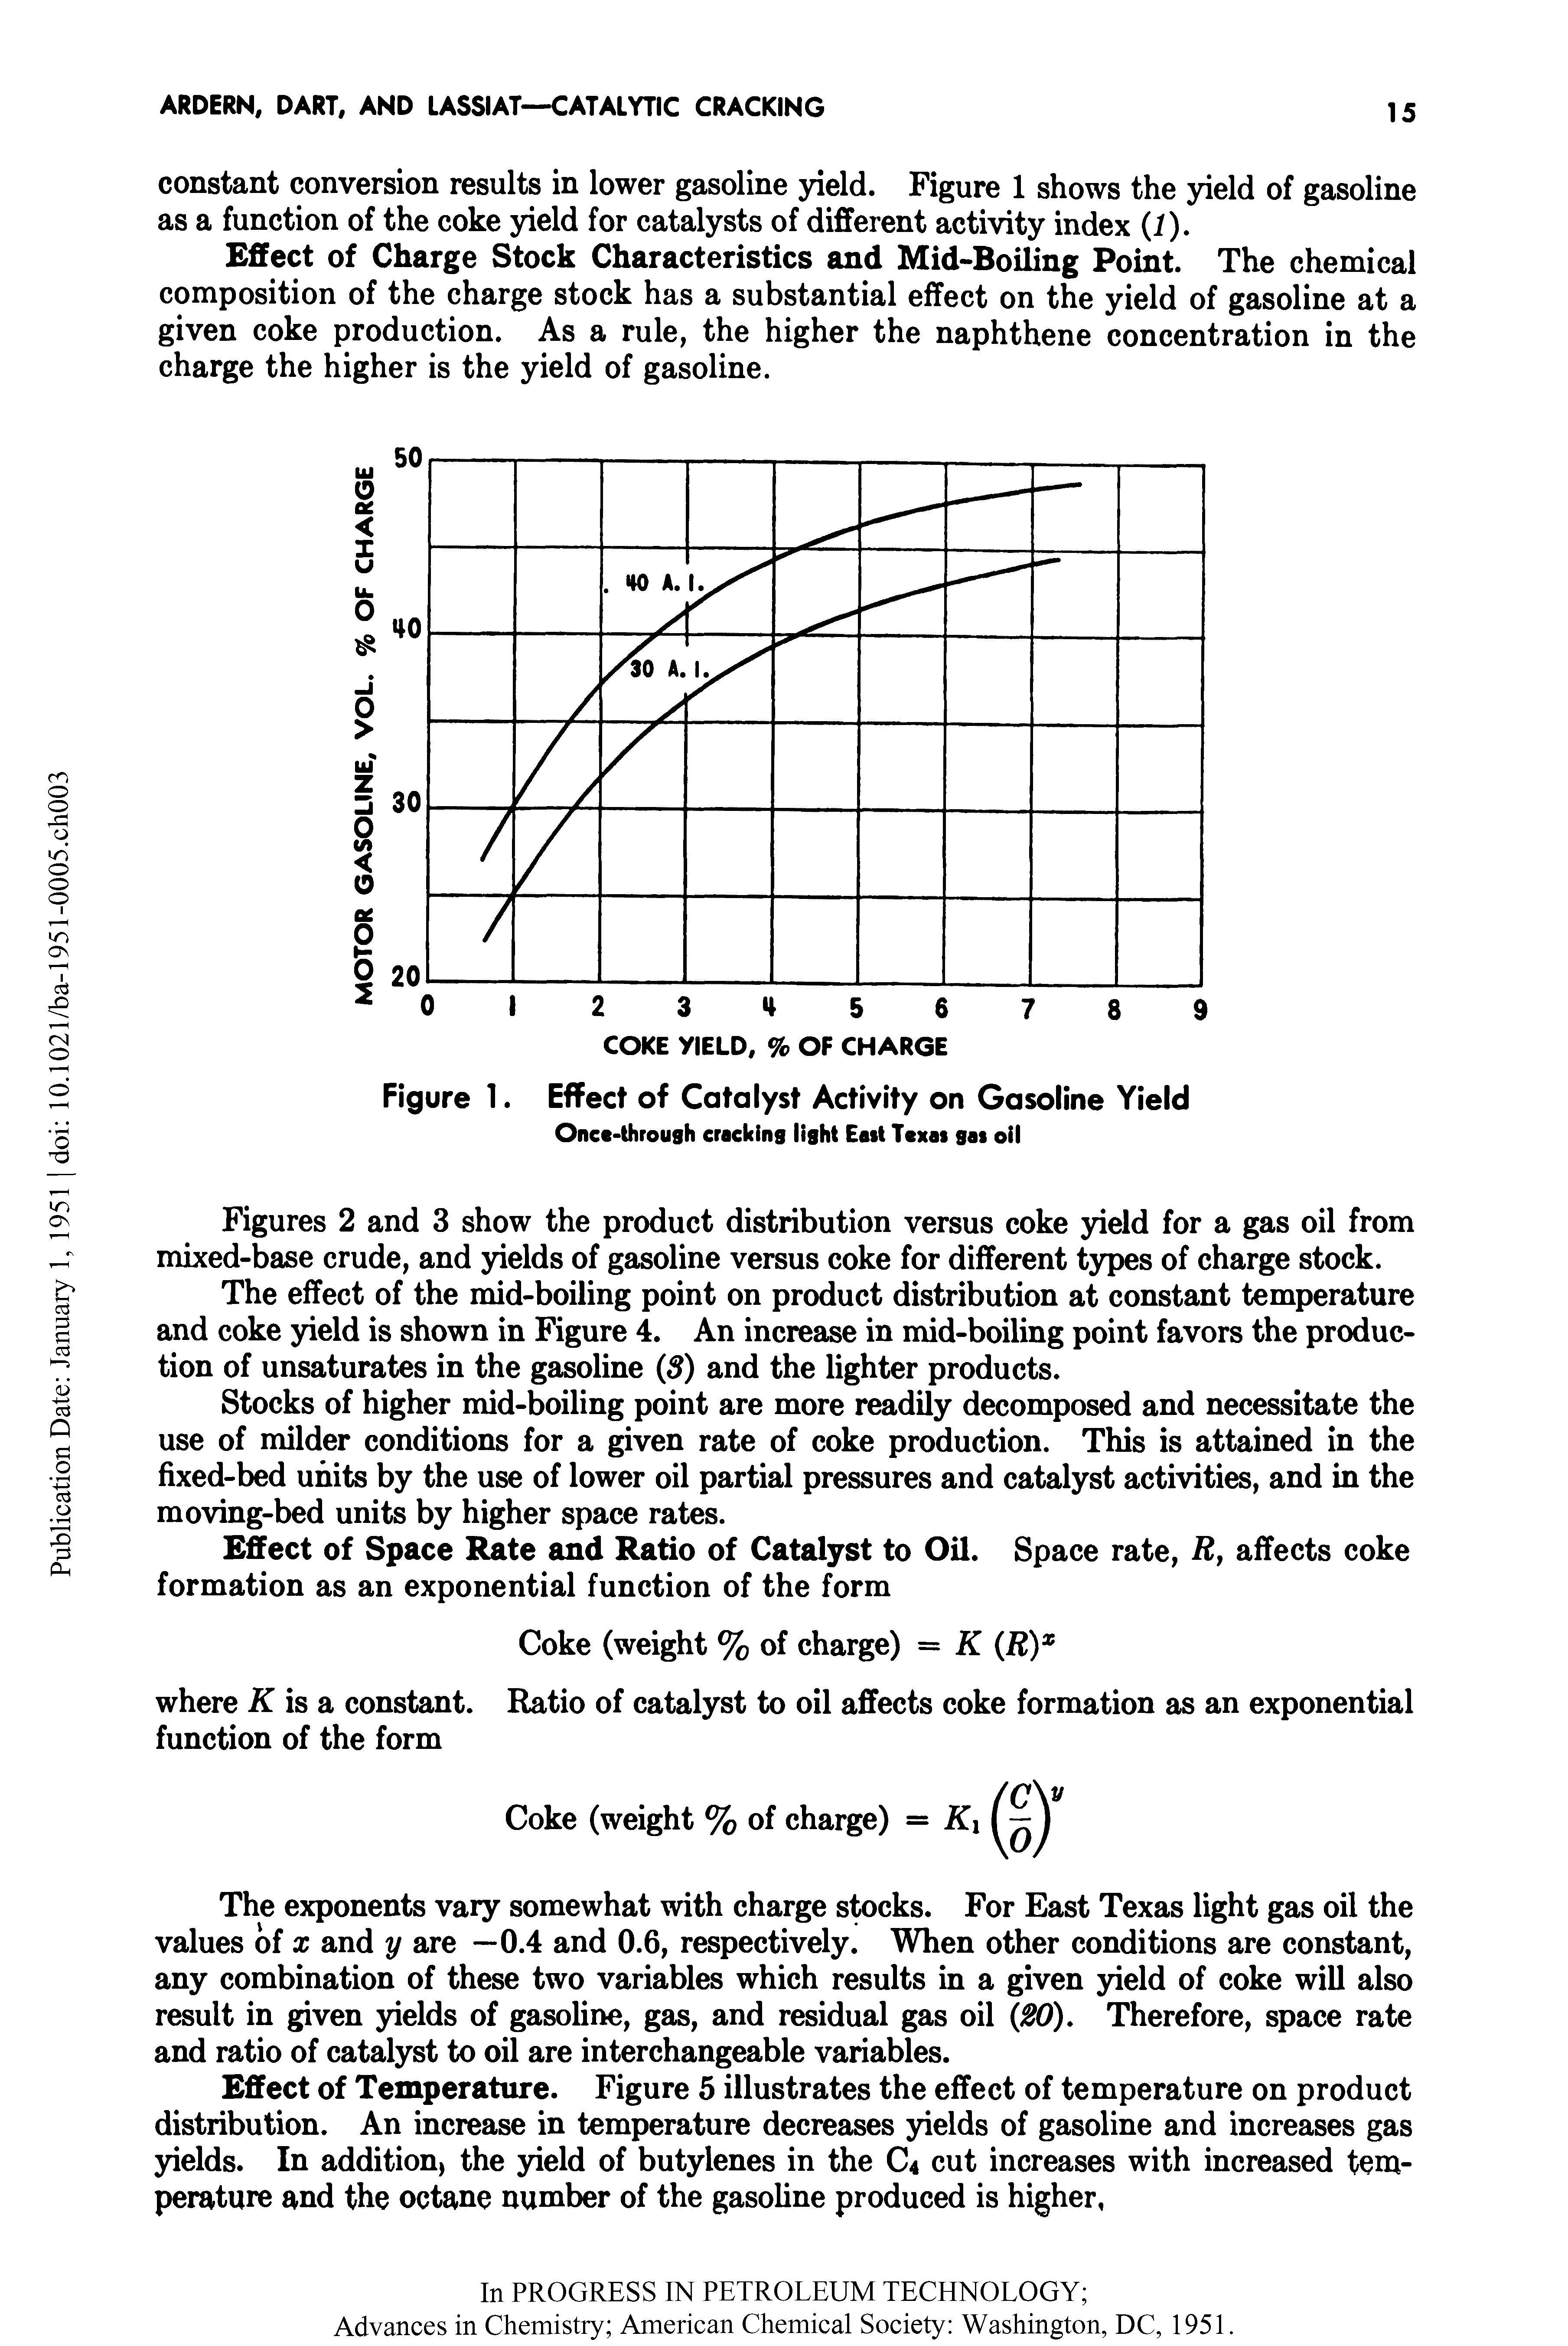 Figures 2 and 3 show the product distribution versus coke yield for a gas oil from mixed-base crude, and yields of gasoline versus coke for different types of charge stock.